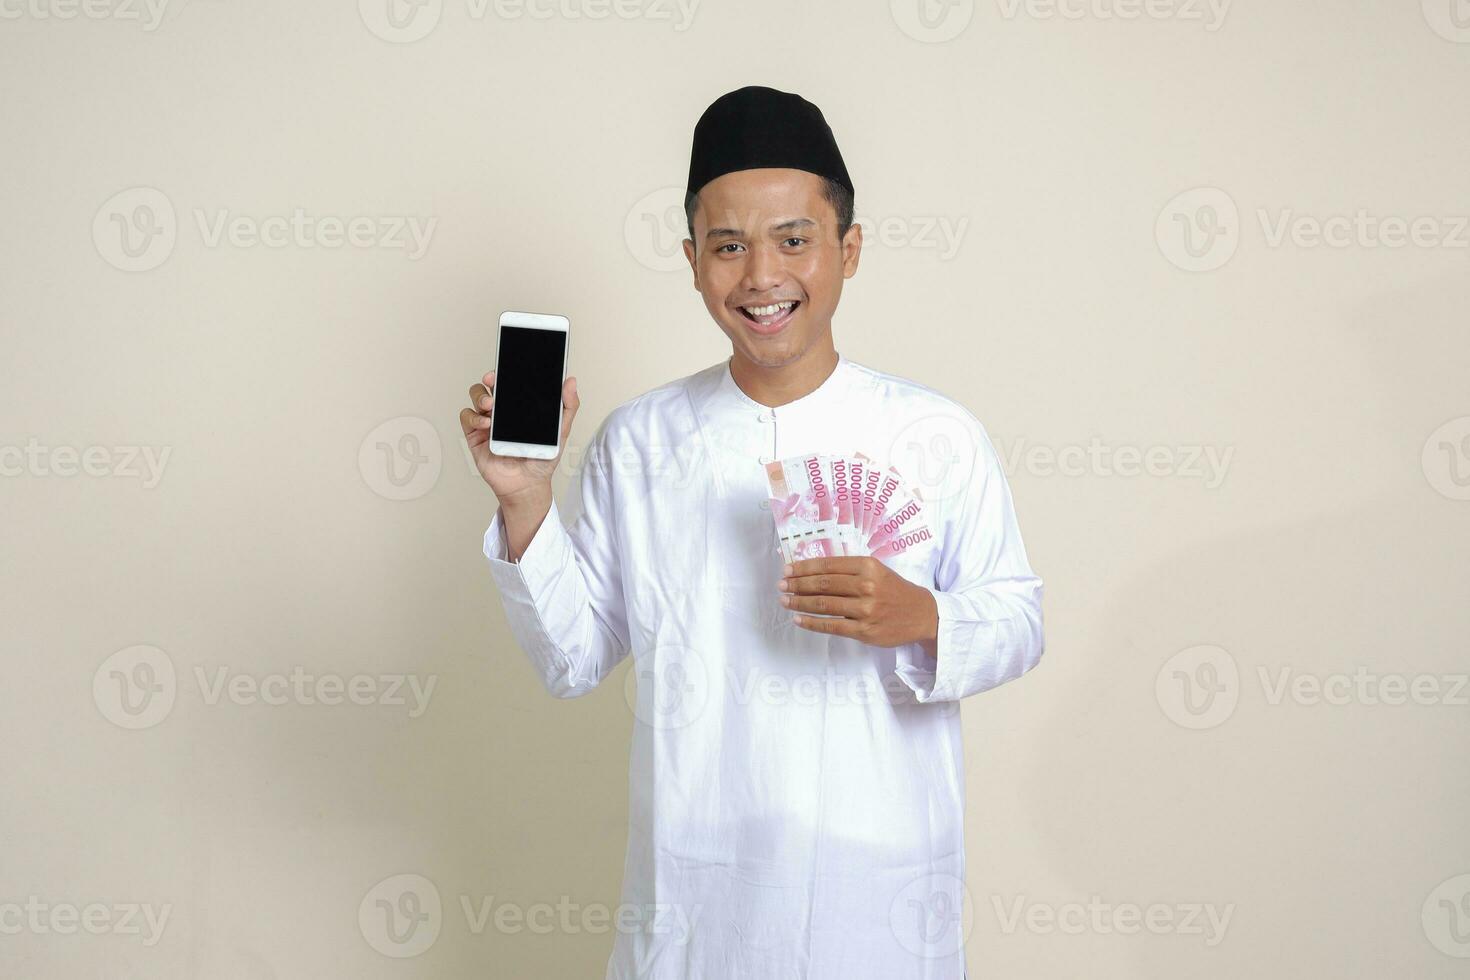 Portrait of attractive Asian muslim man in white shirt with skullcap showing one hundred thousand rupiah while showing blank screen mobile phone. Financial and shopping concept. Isolated image on gray photo